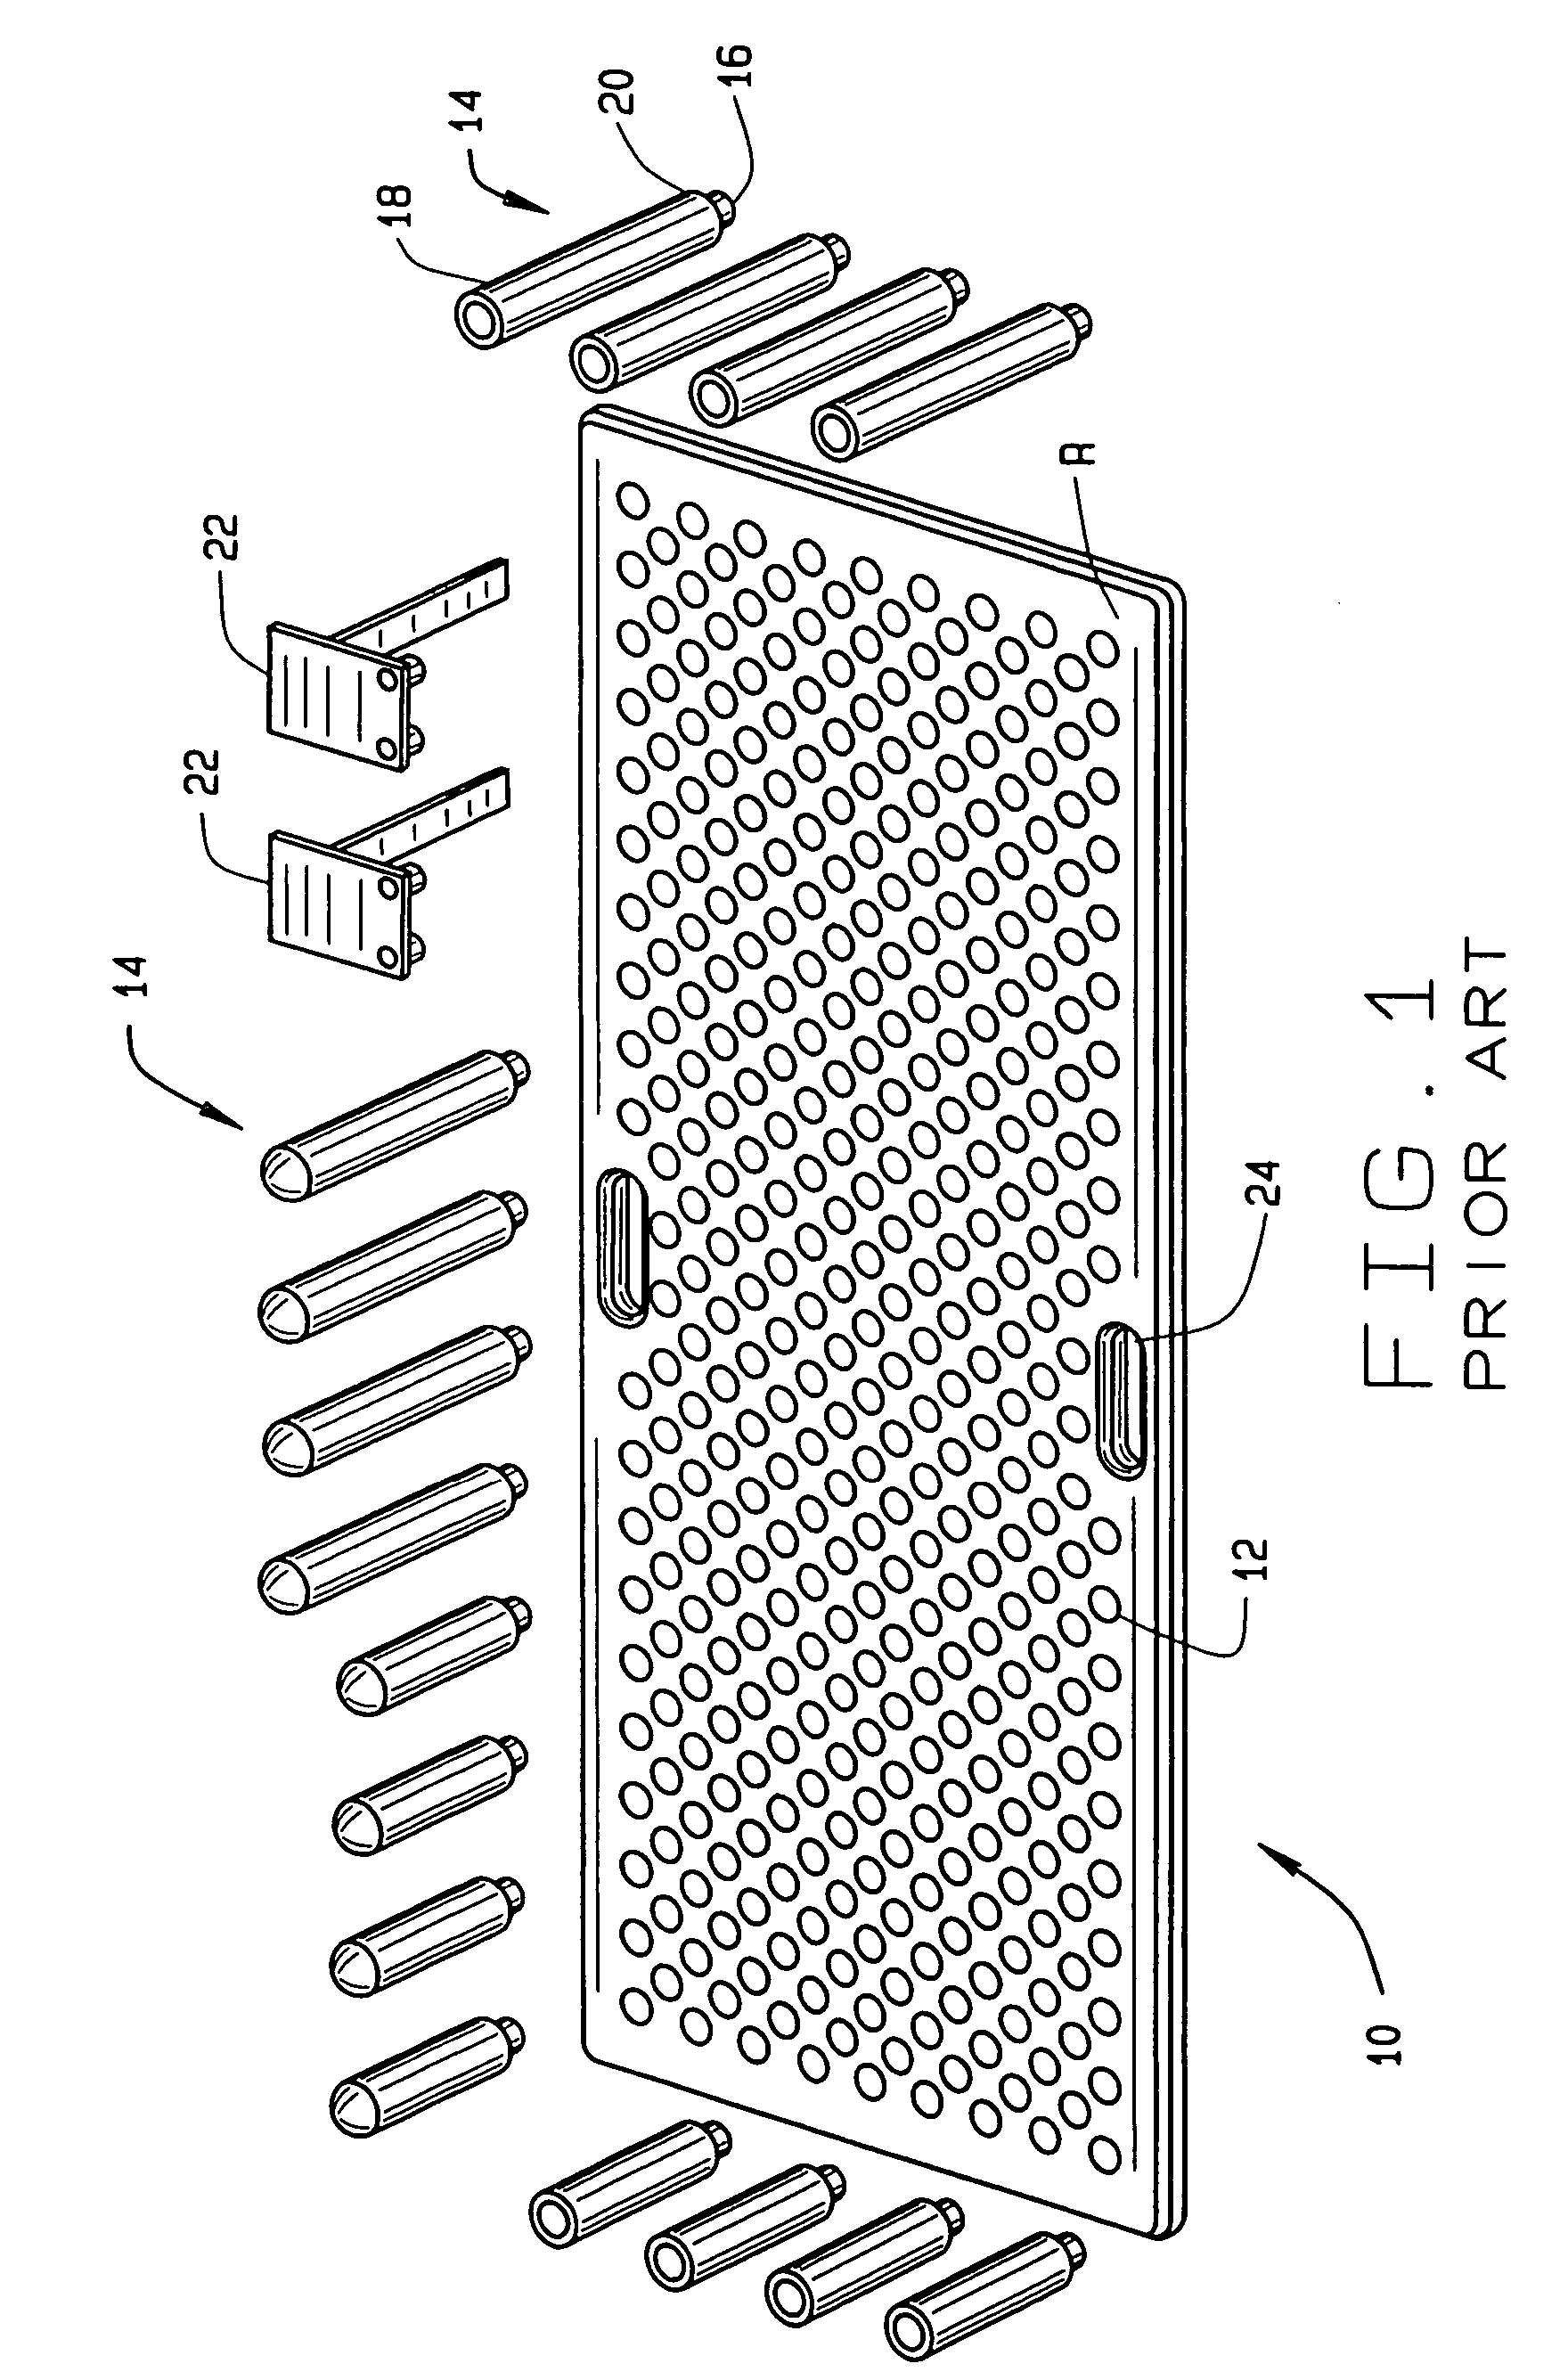 Surgical fixture device and method for supporting a patient during surgery